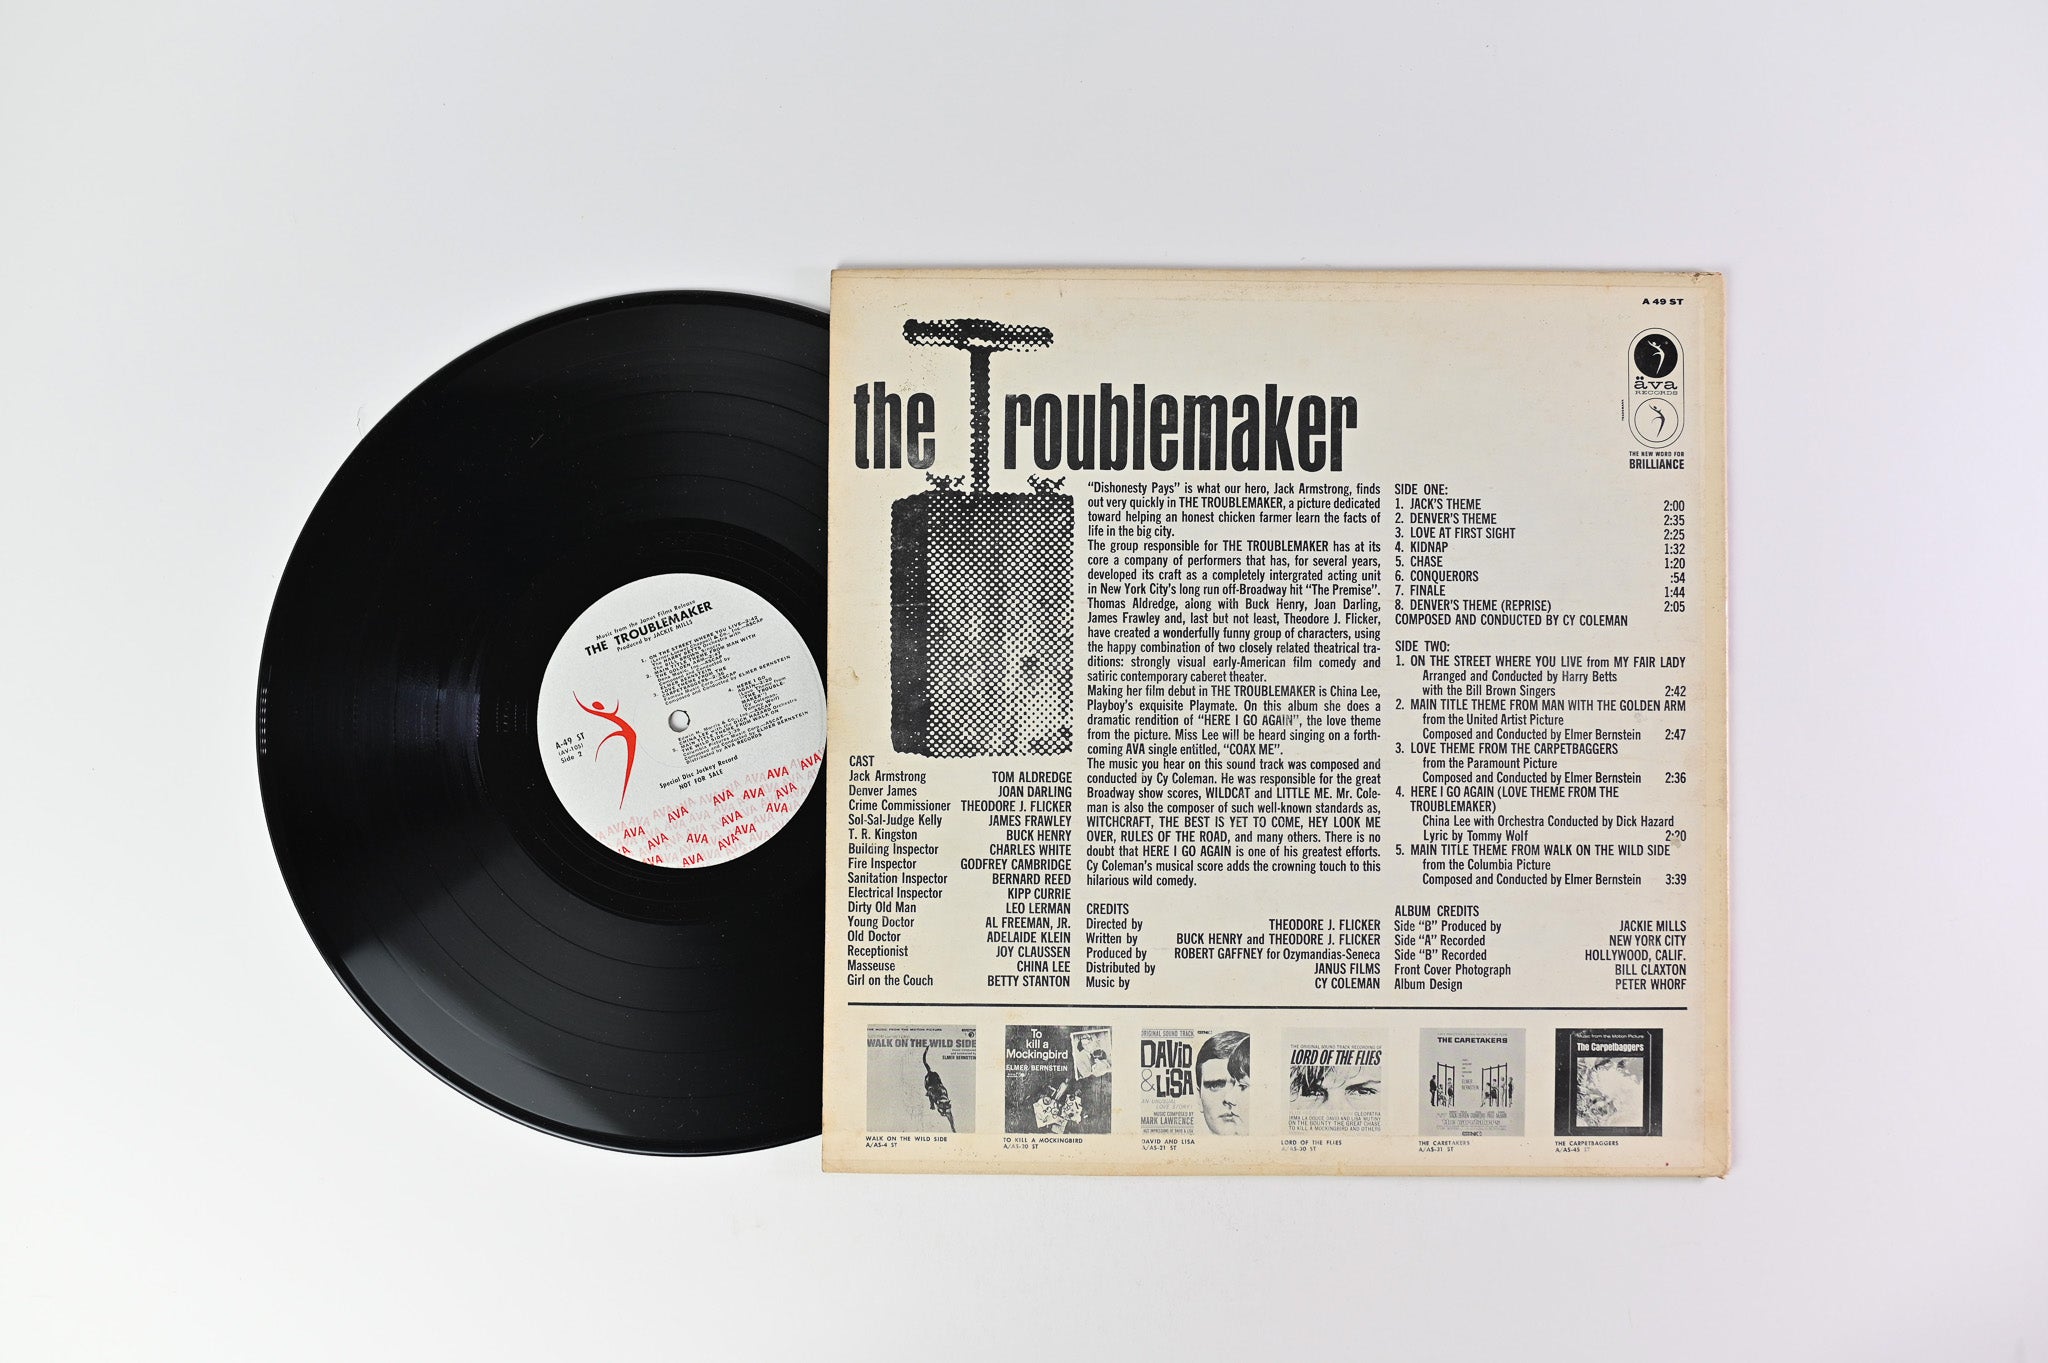 Cy Coleman - The Troublemaker (Original Sound Track From The Janus Films Presentation) on Ava Records